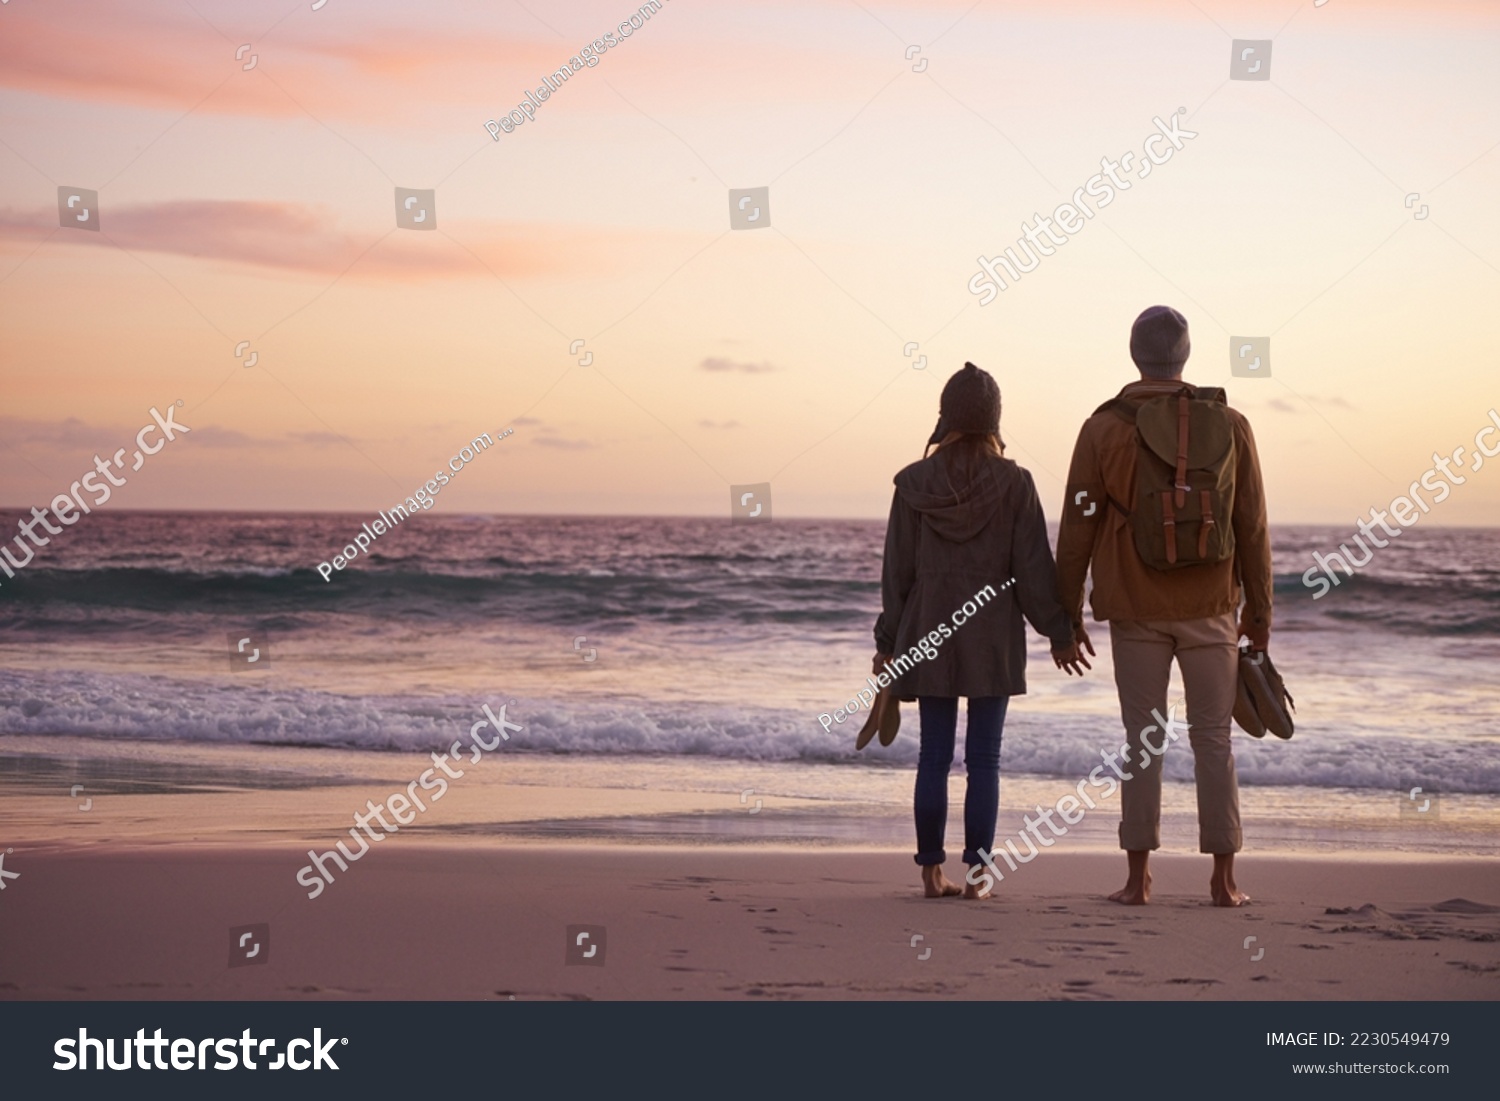 Life is perfect when Im with you. Shot of a couple enjoying a romantic evening on the beach at sunset. #2230549479